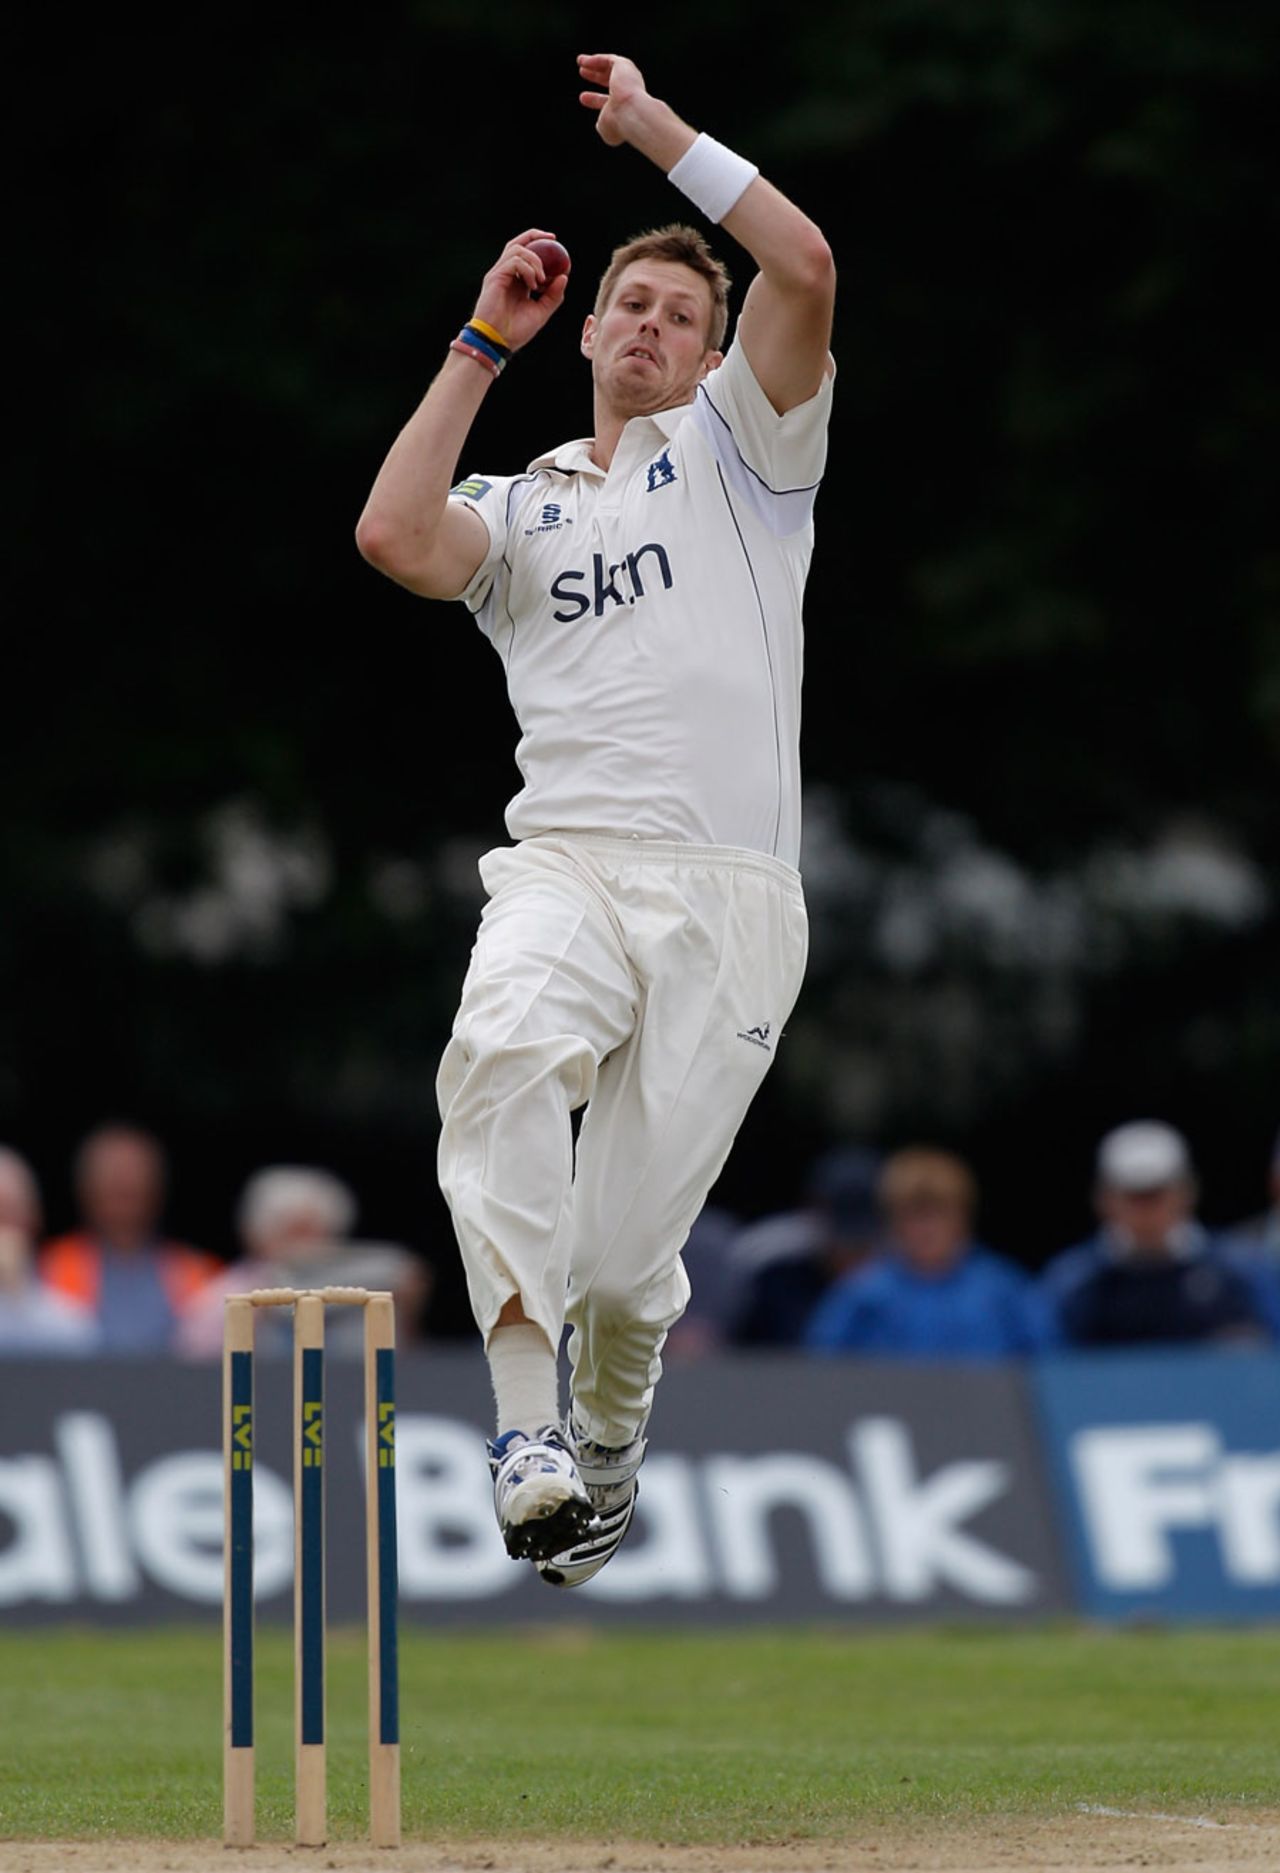 Boyd Rankin did not have a productive day with the ball, County Championship, Division One, Uxbridge, 1st day, August 1, 2012